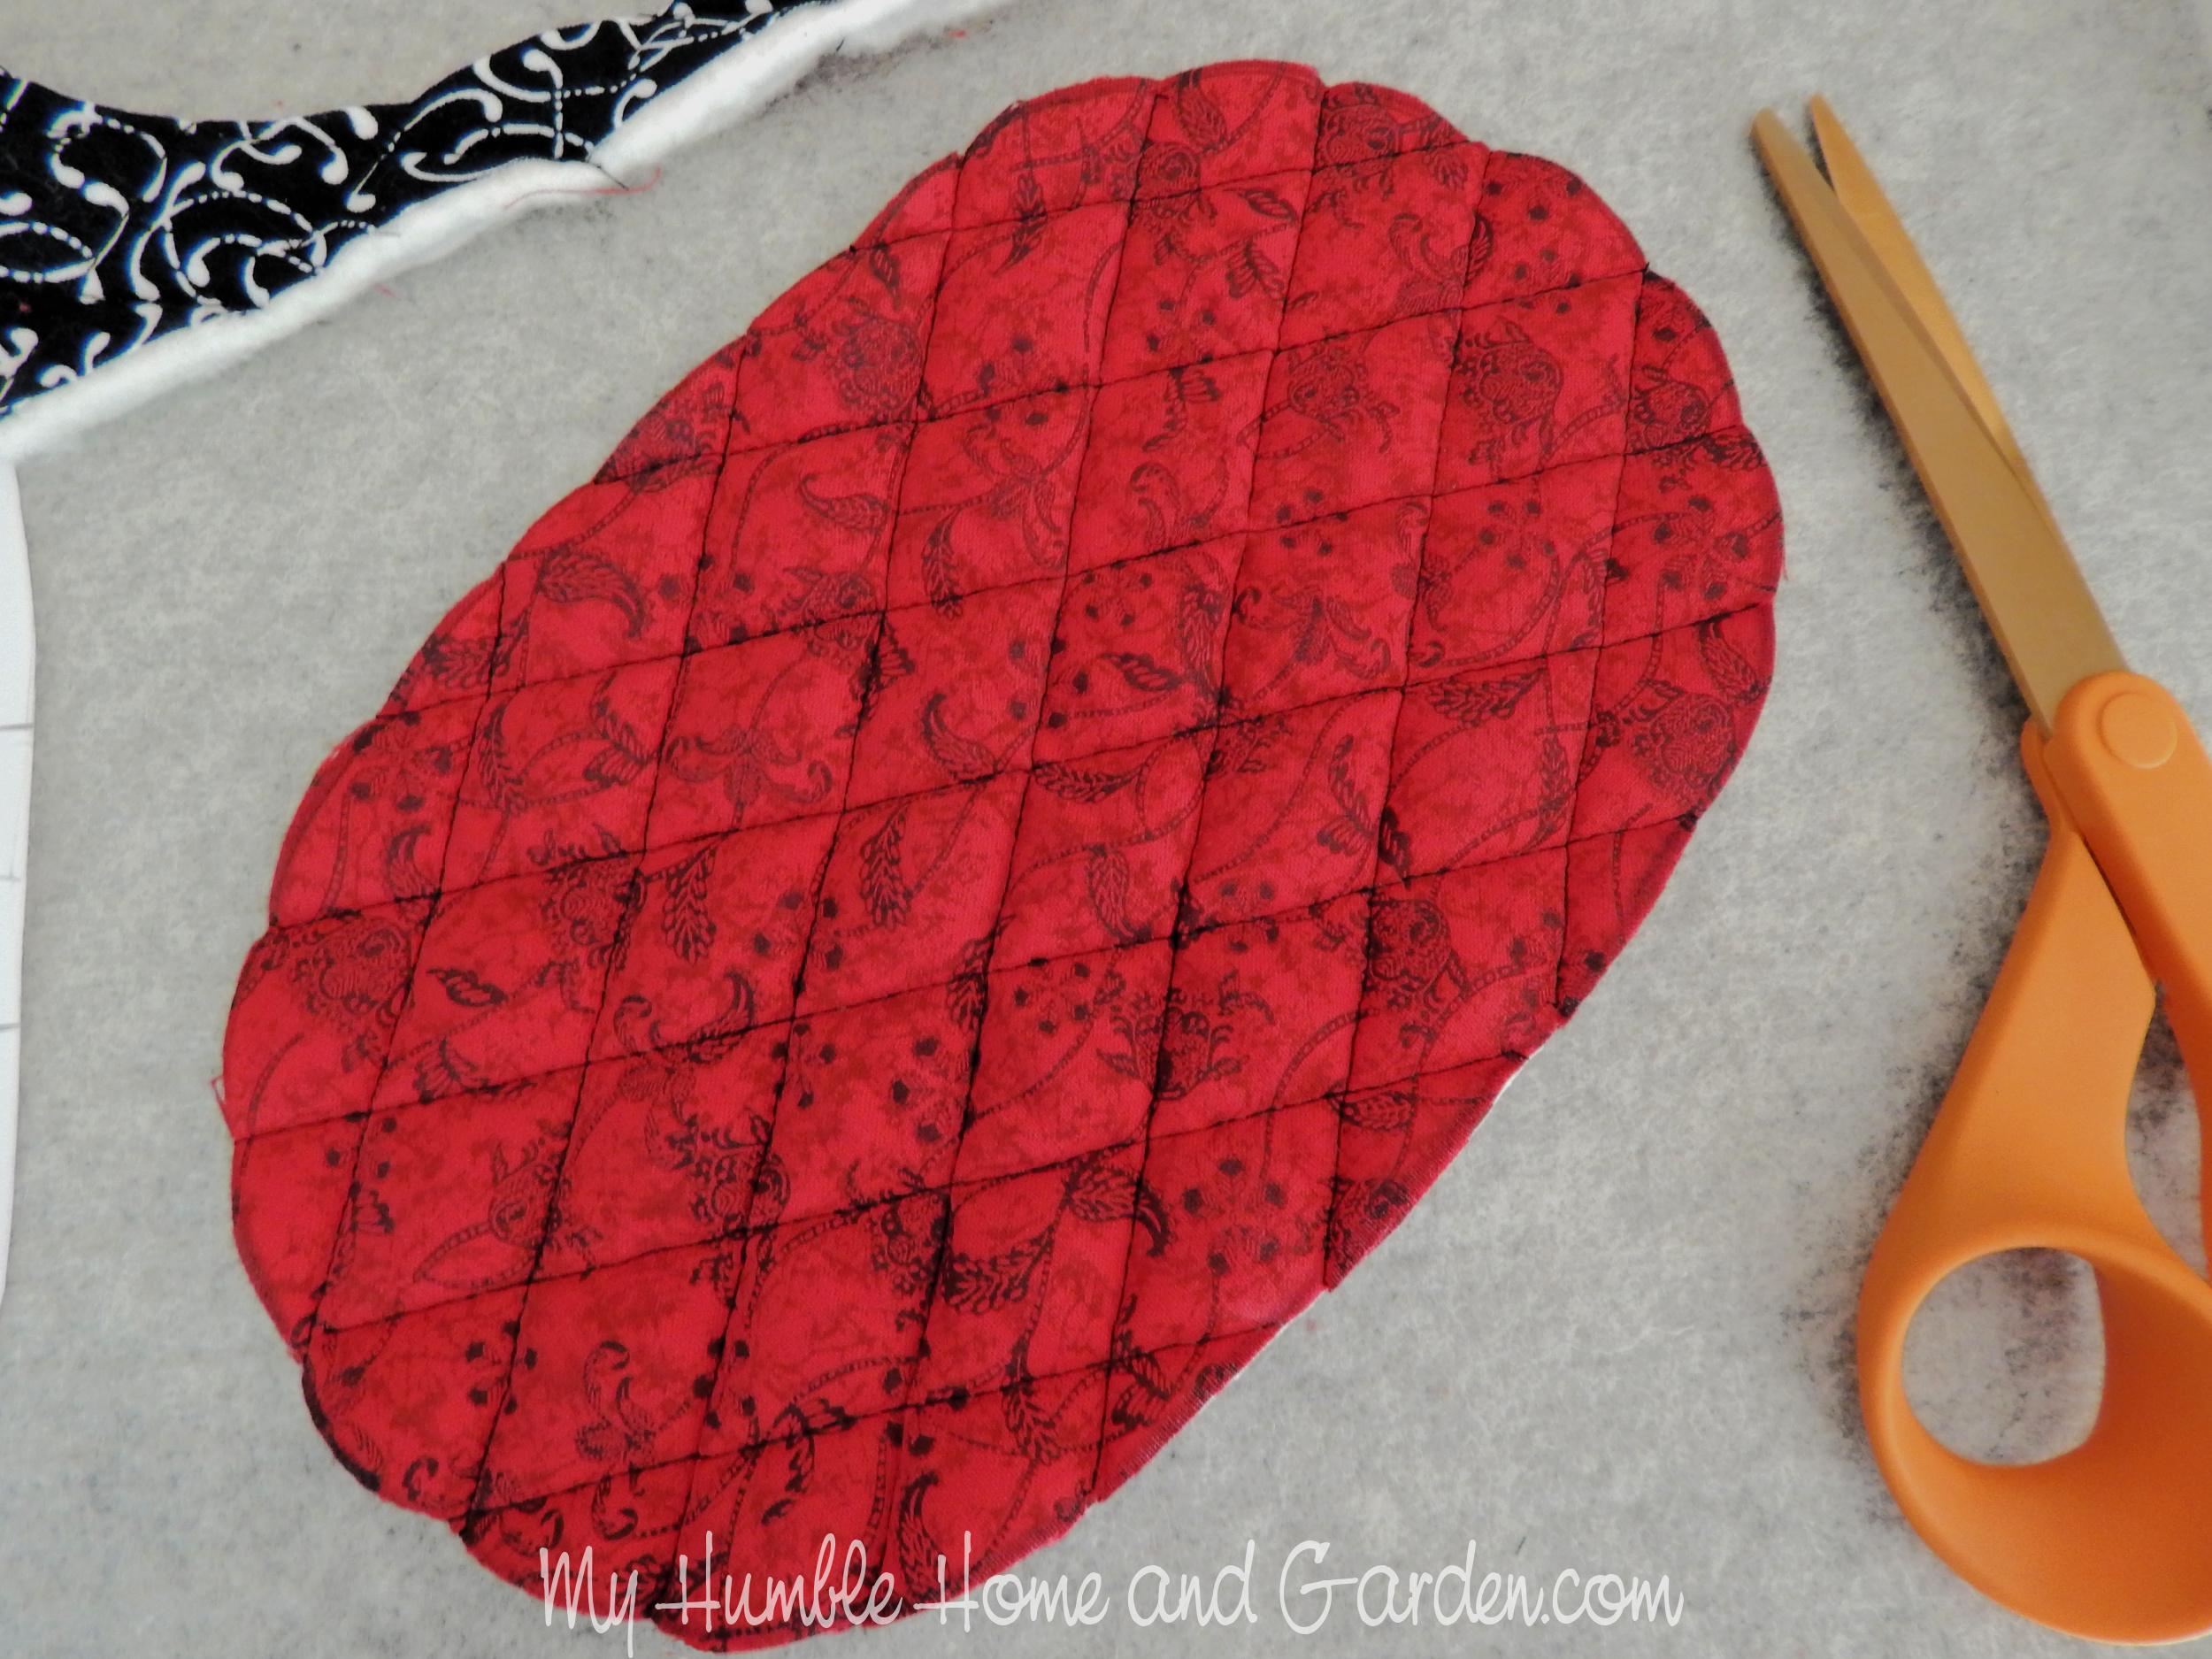 11 Cute DIY Oven Mitt Projects For Cooking Fans - Shelterness